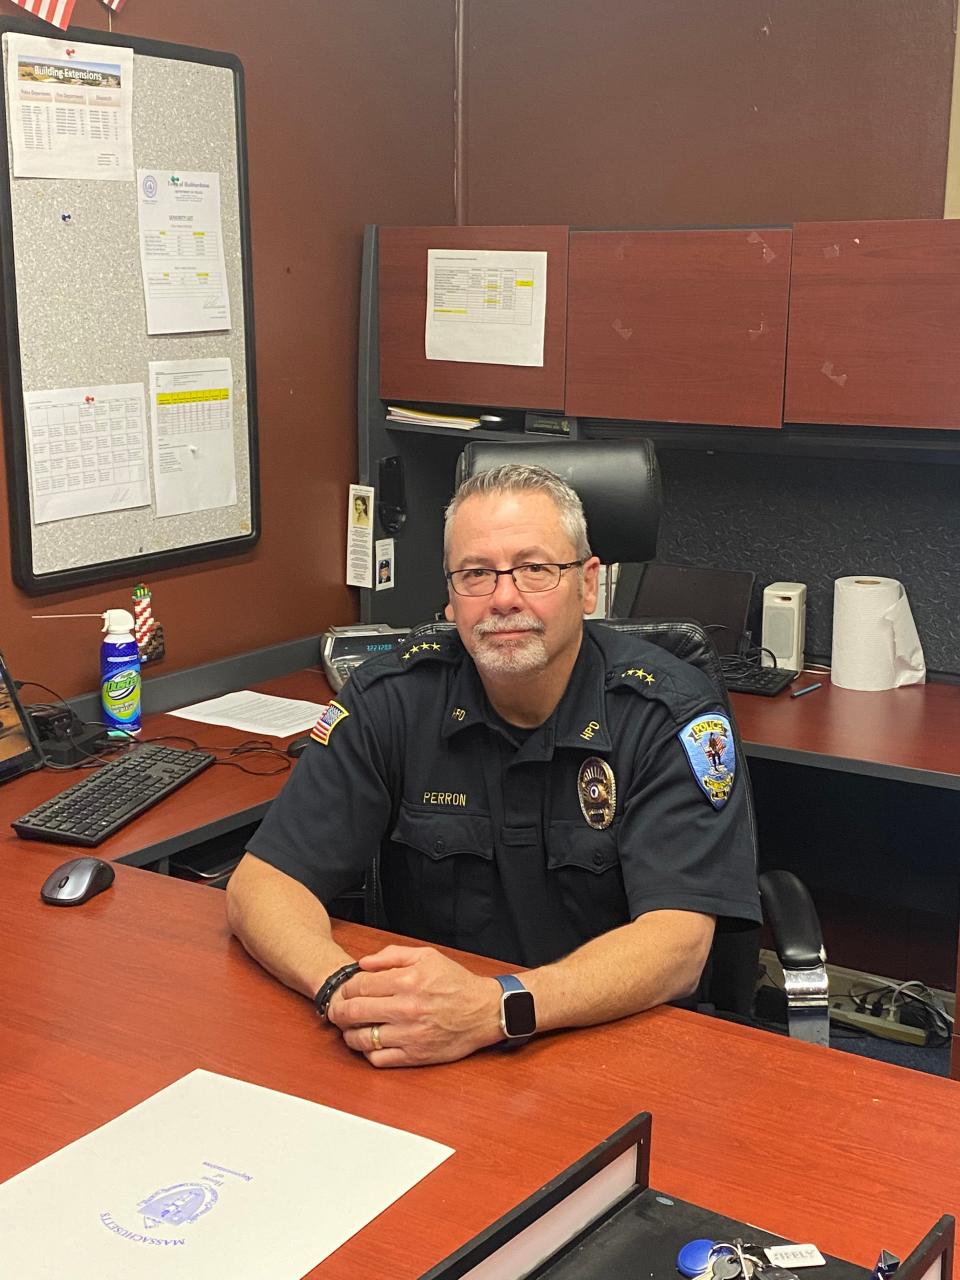 As Dennis Perron retires from law enforcement, he reflects on the 16 years he served as Hubbardston's chief of police.